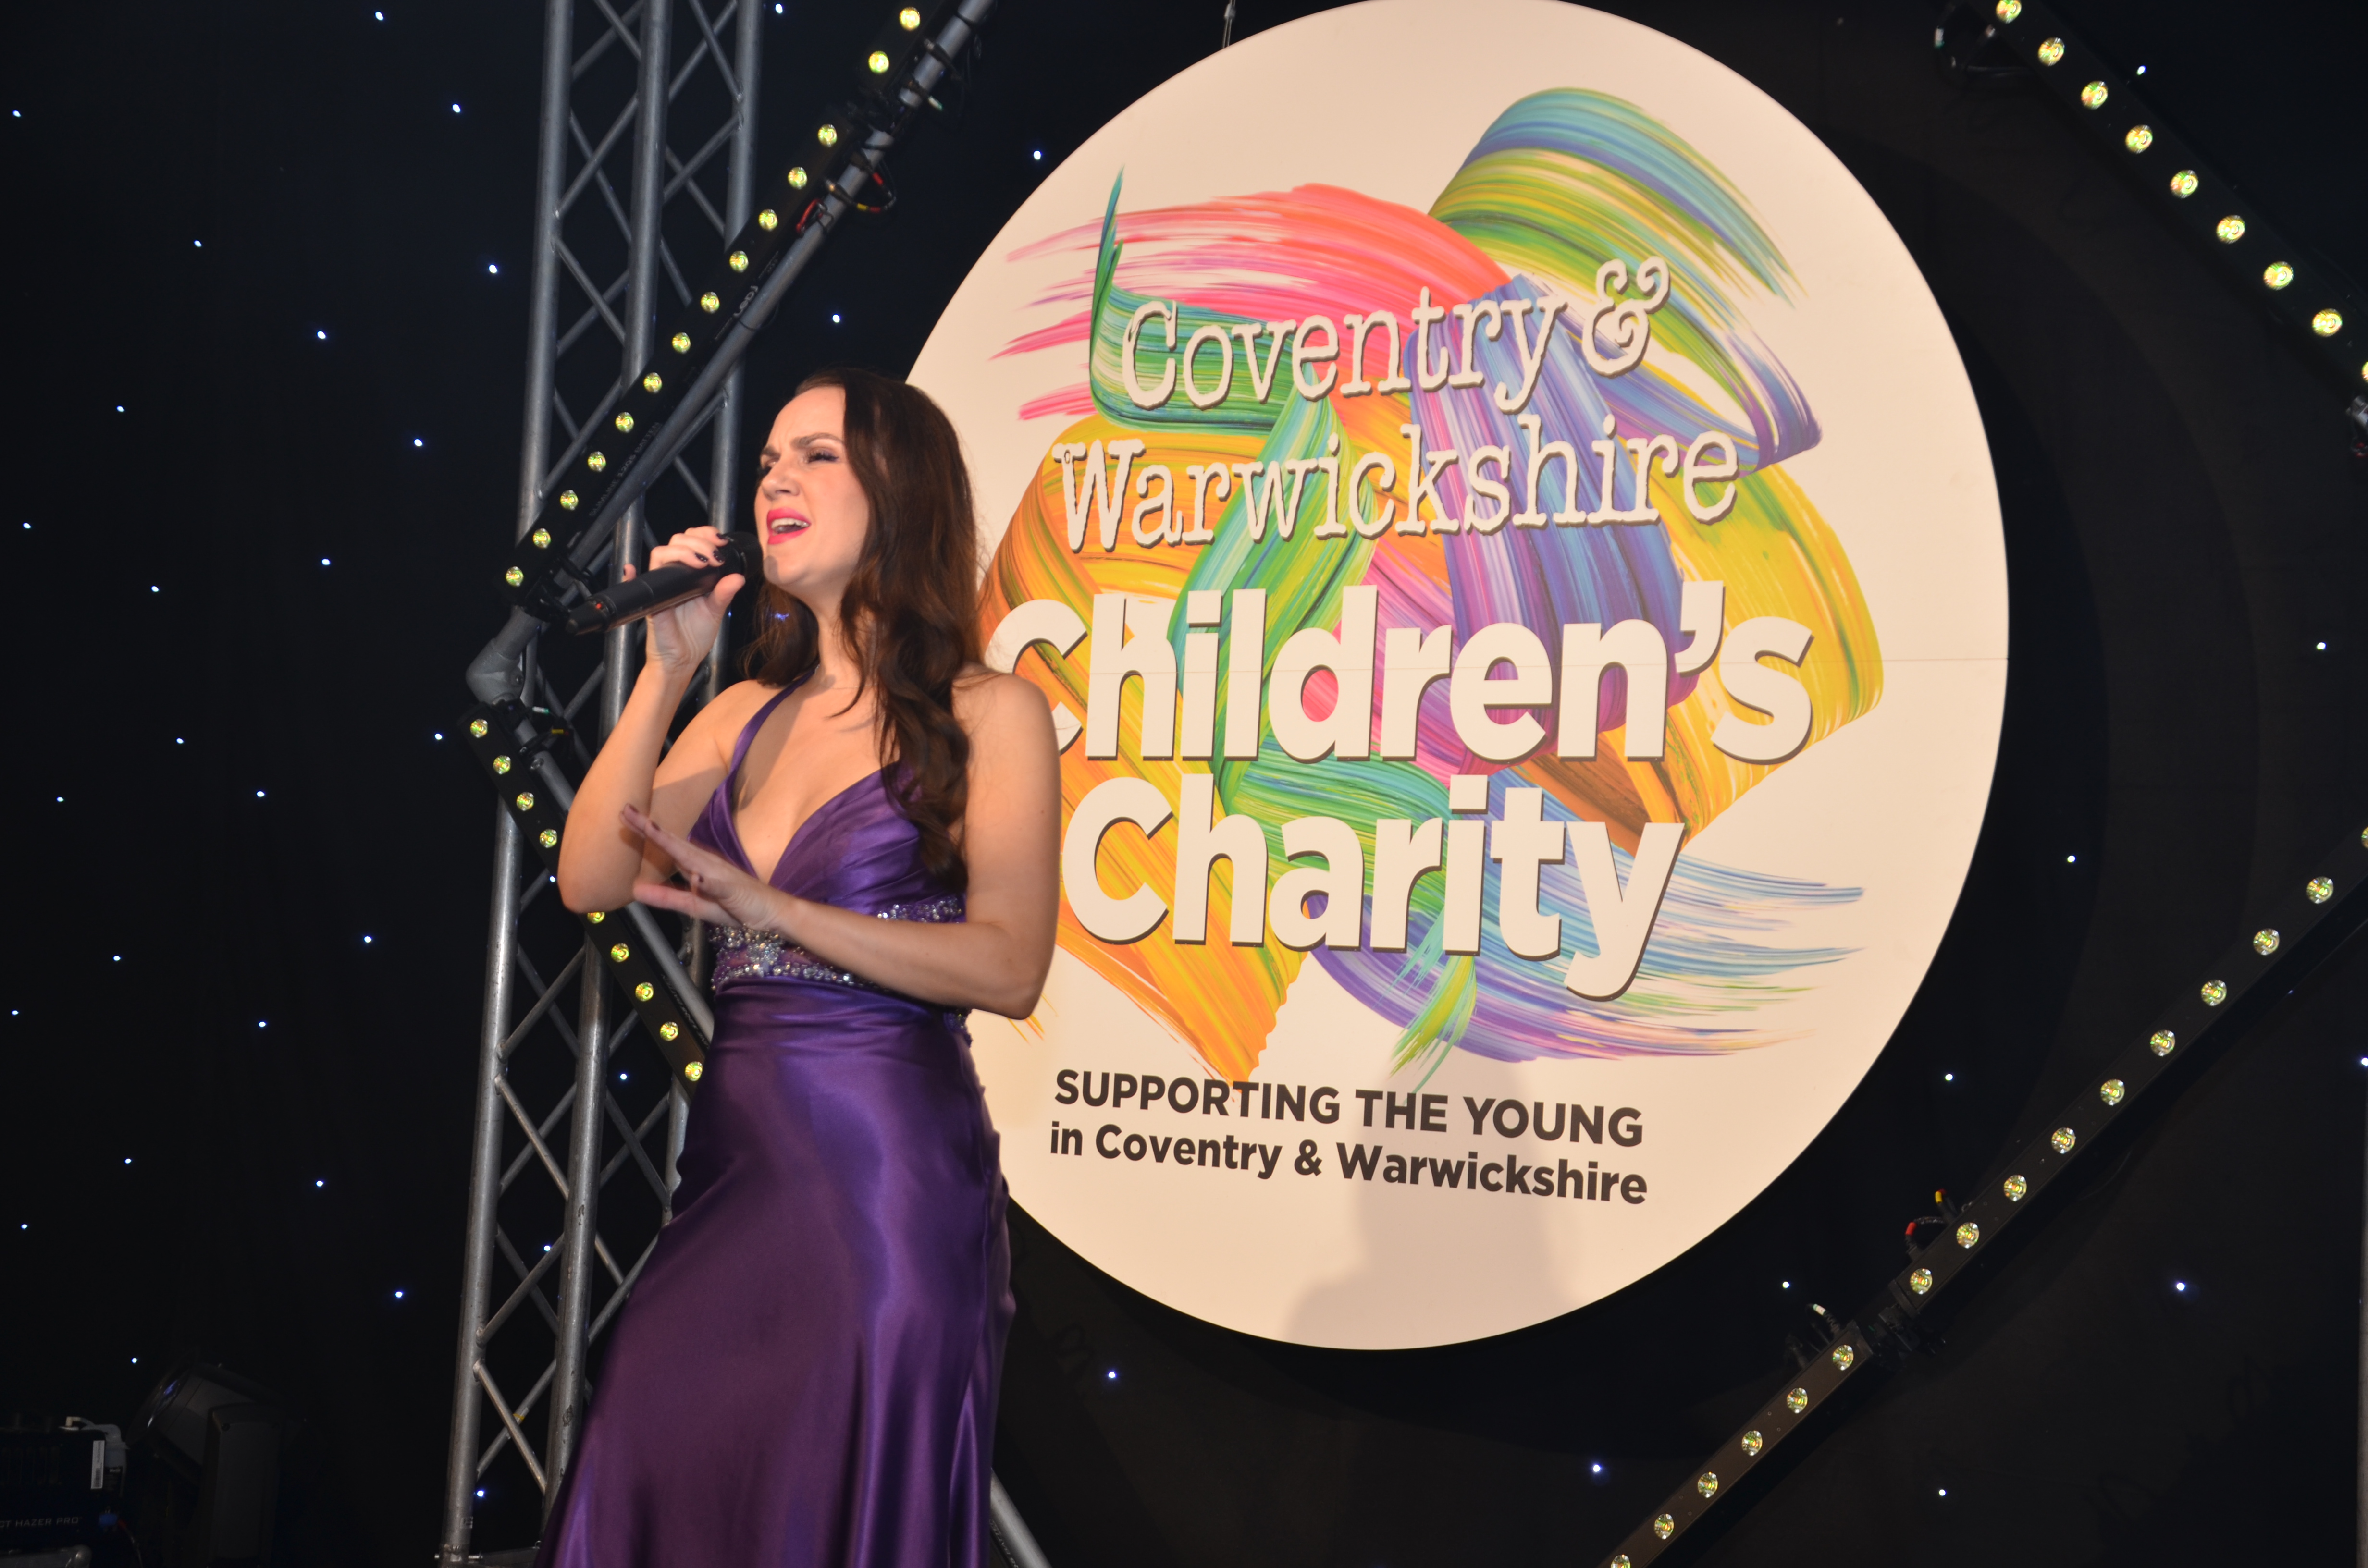 Major fundraising ball in Coventry to support creation of therapy centre for abused children